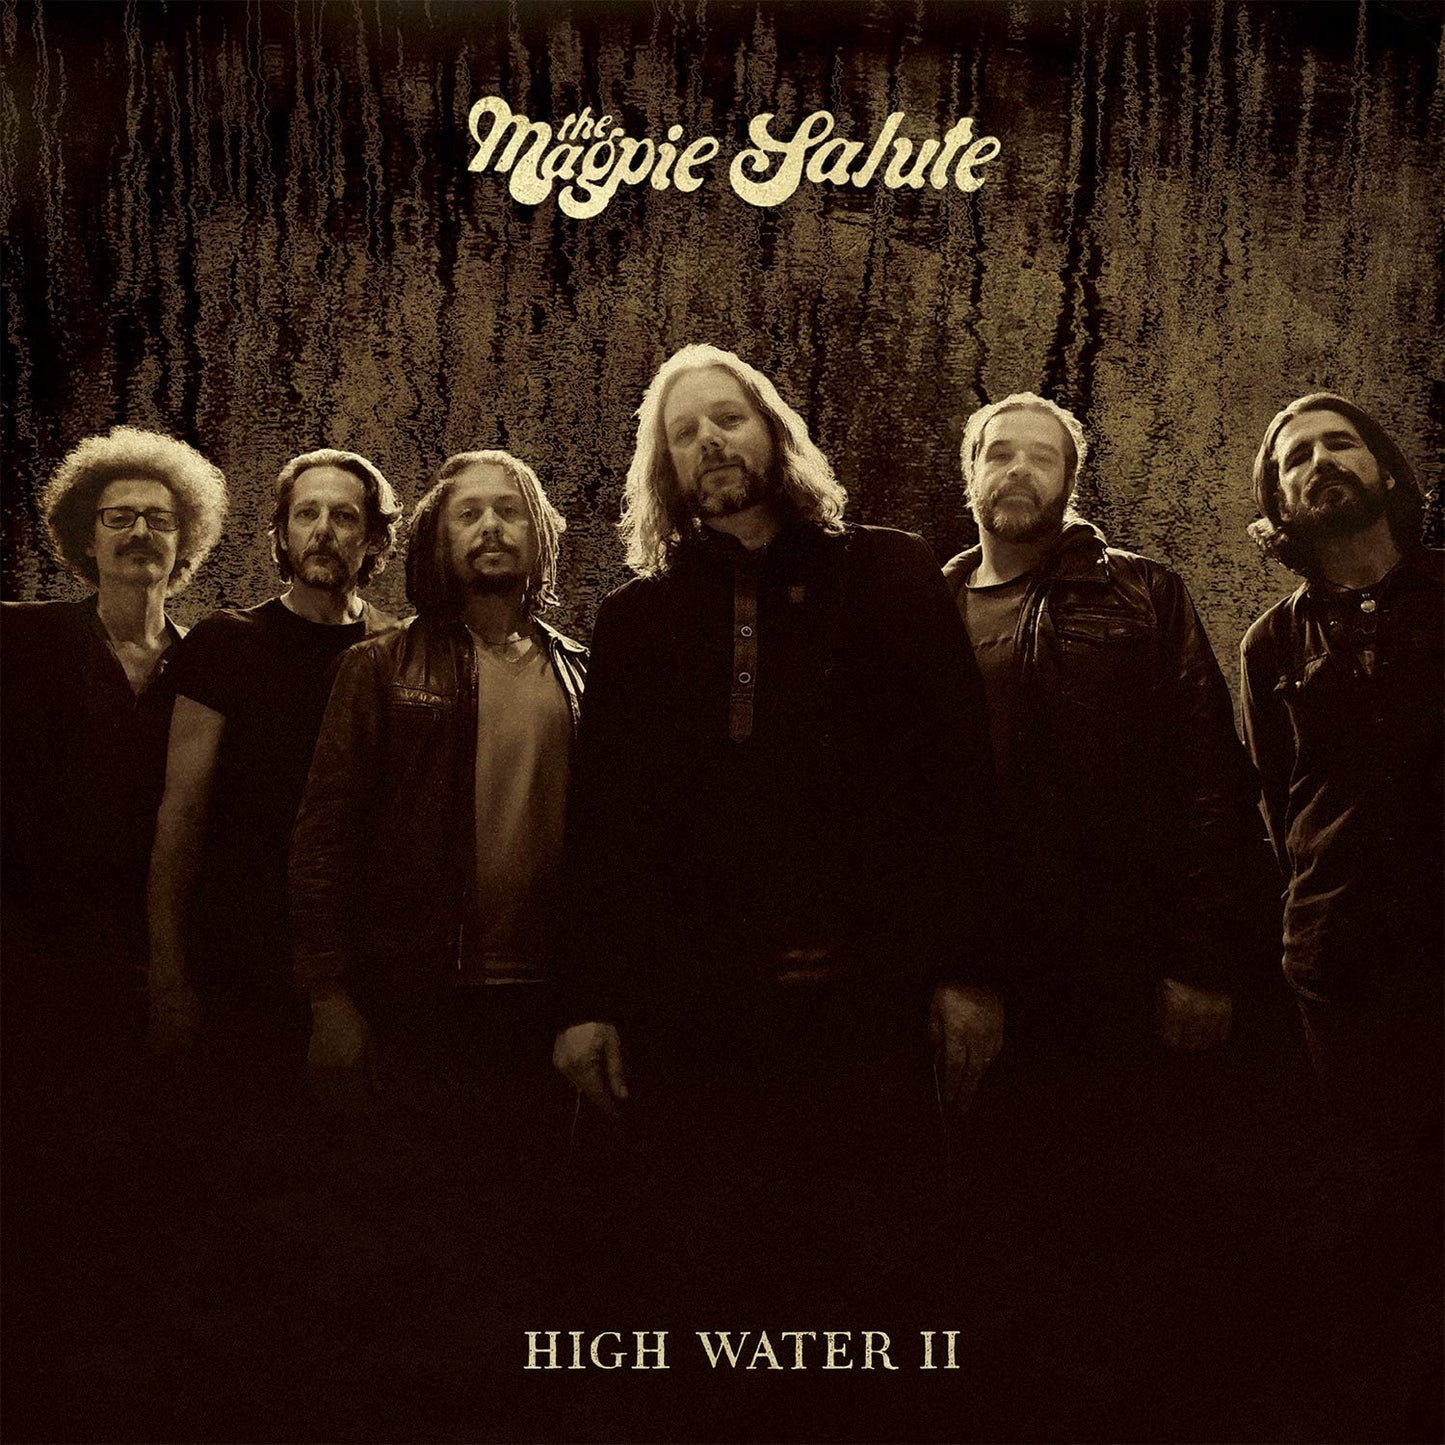 The Magpie Salute – High Water II - USED CD